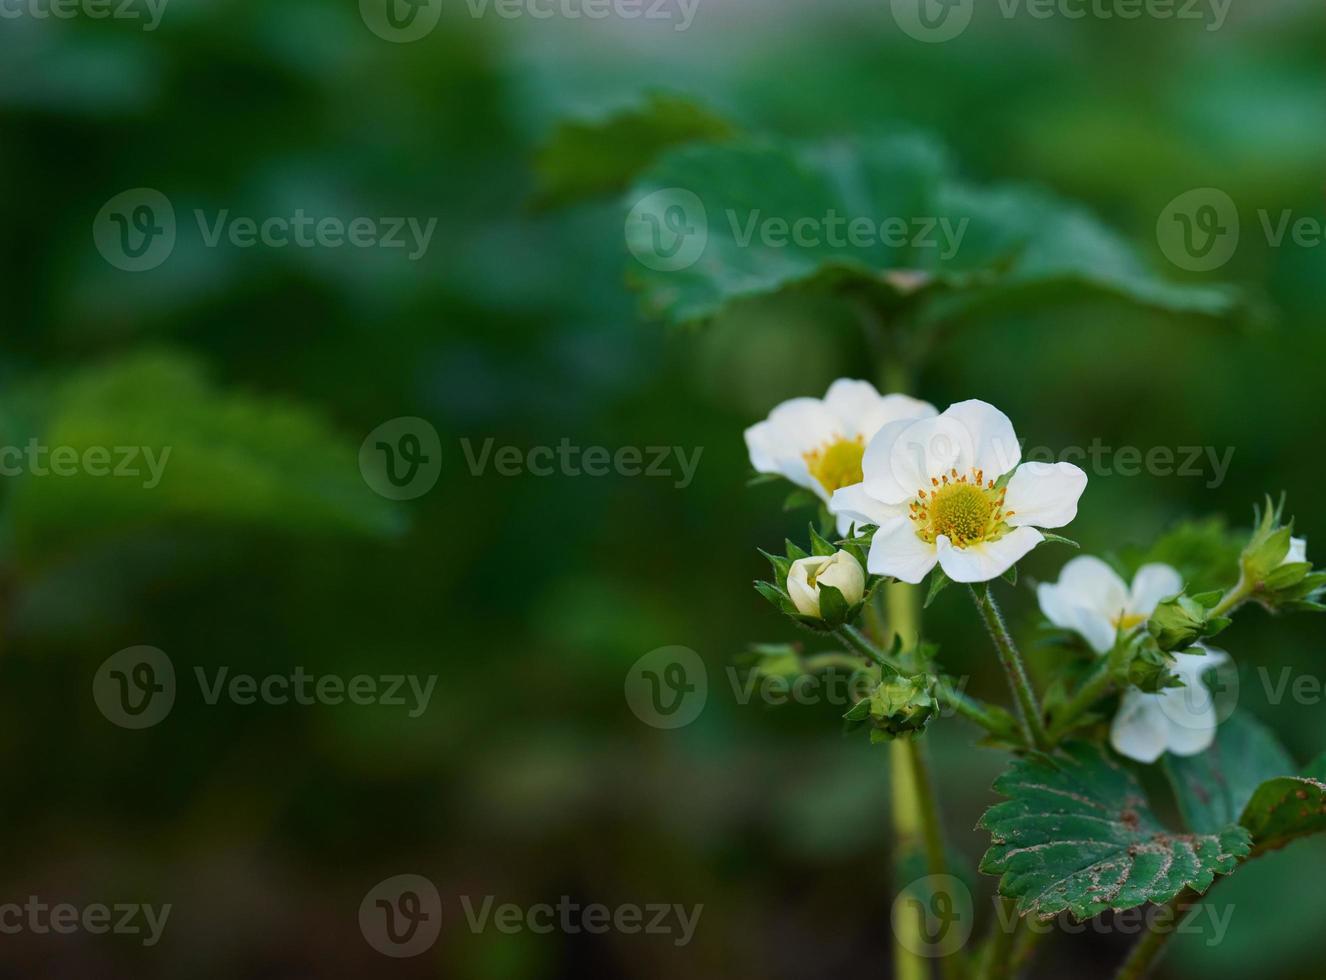 Strawberry bush with green leaves and white flowers in vegetable garden, fruit growing photo